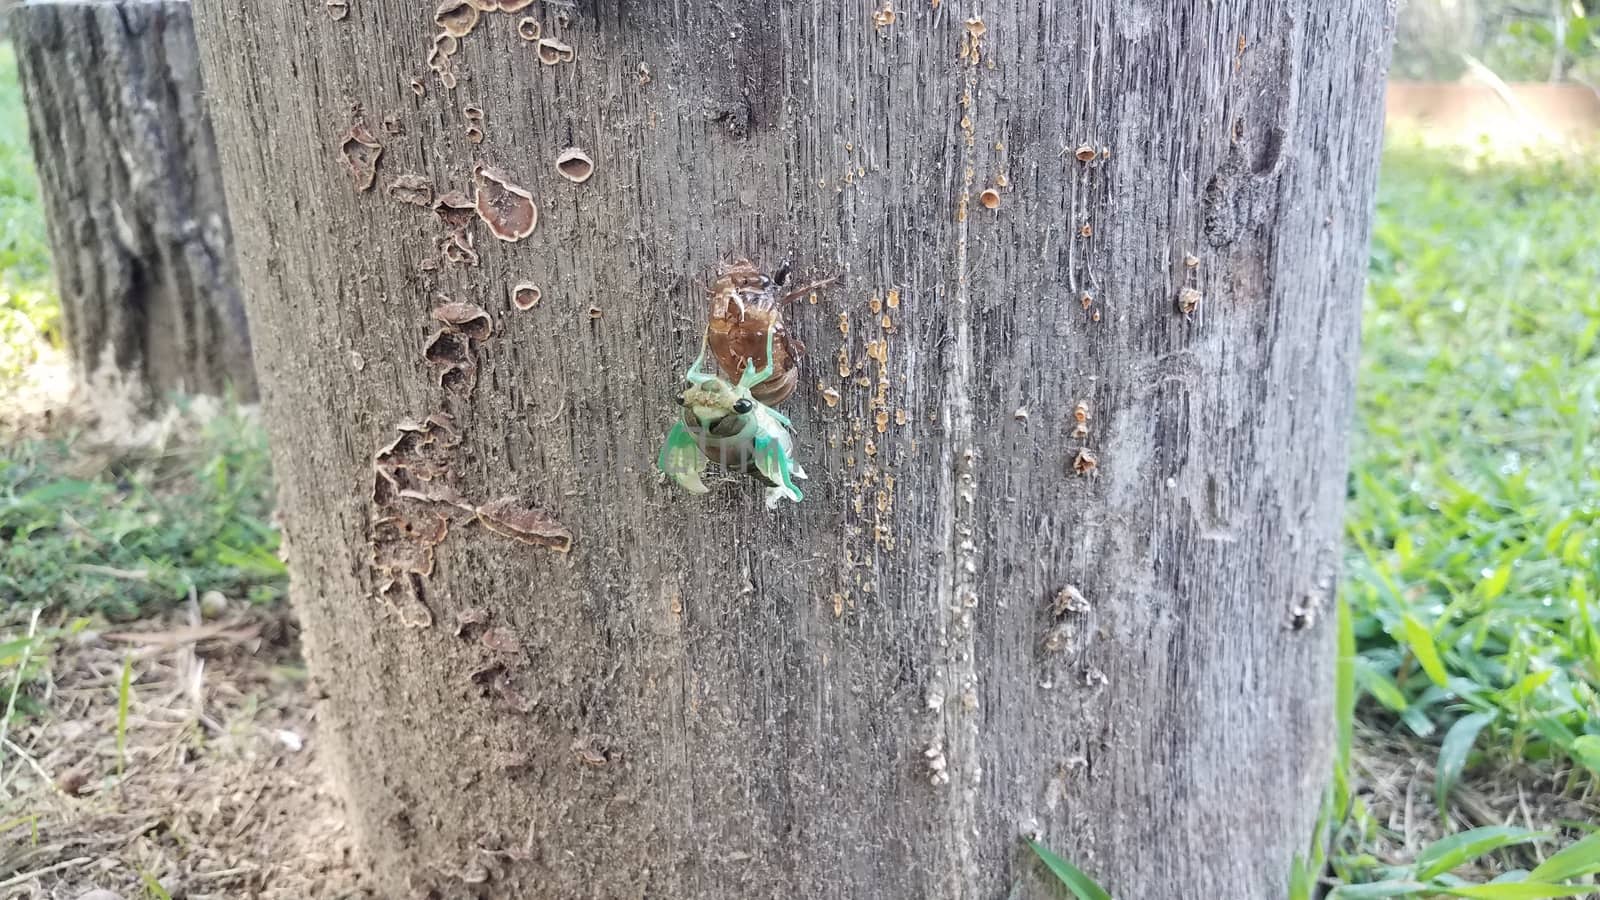 green cicada molting on tree stump emerging from skin by stockphotofan1